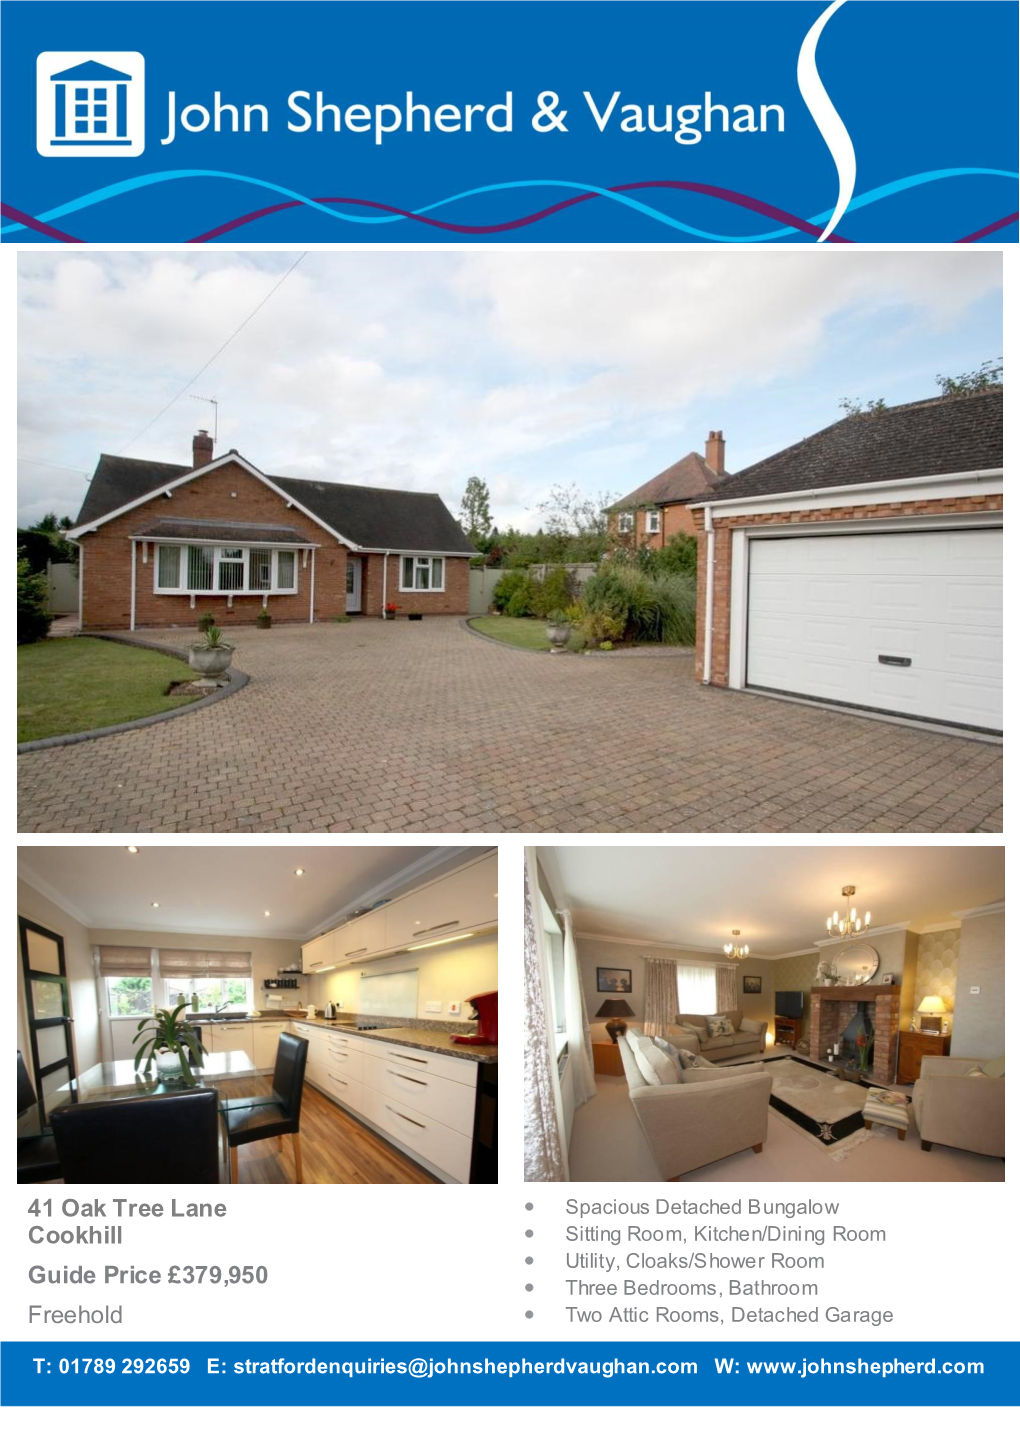 41 Oak Tree Lane Cookhill Guide Price £379,950 Freehold